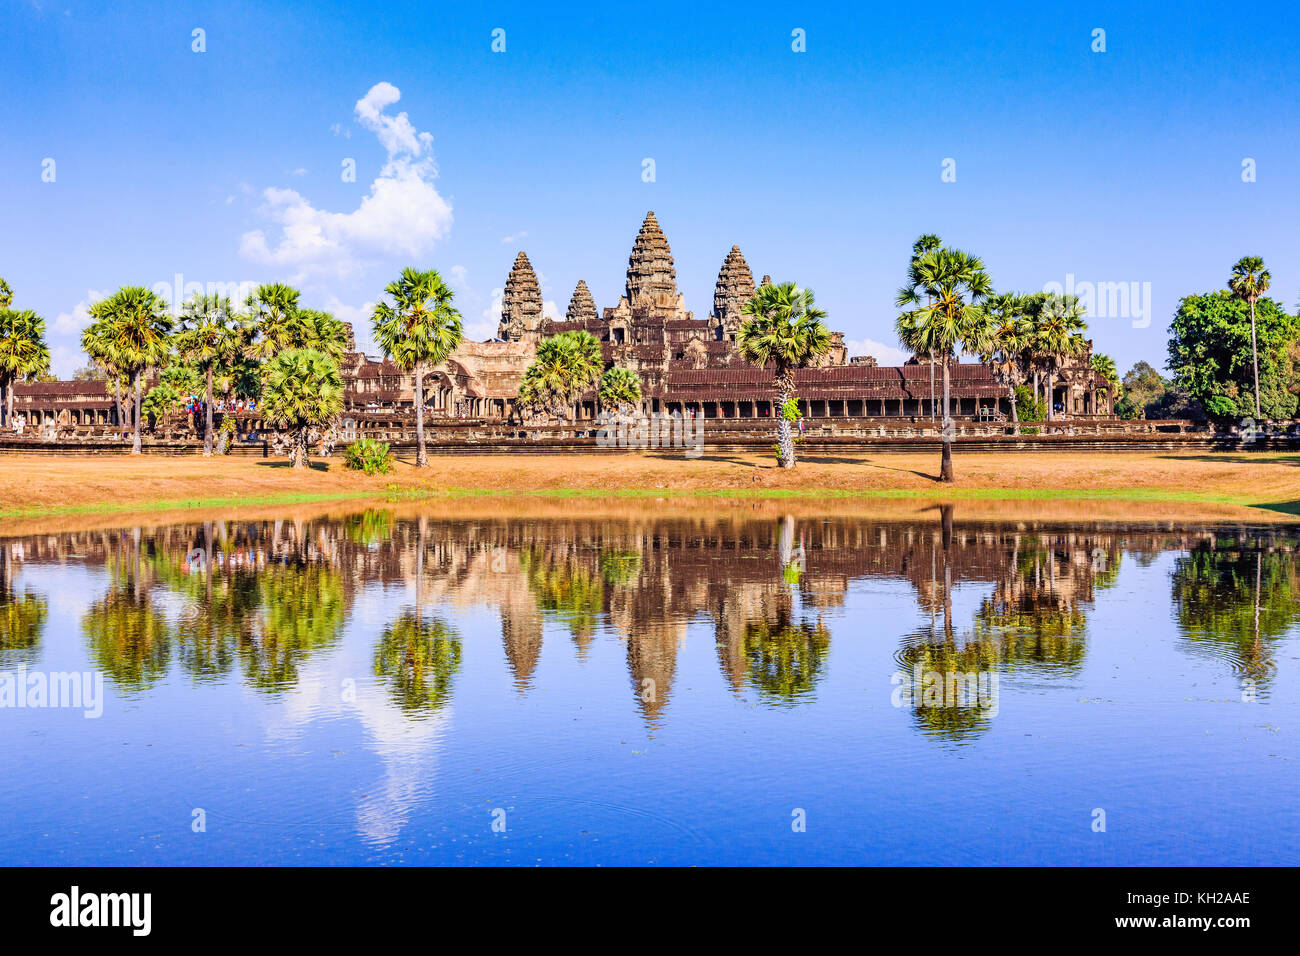 Angkor Wat, Cambodia. View from across the lake. Stock Photo